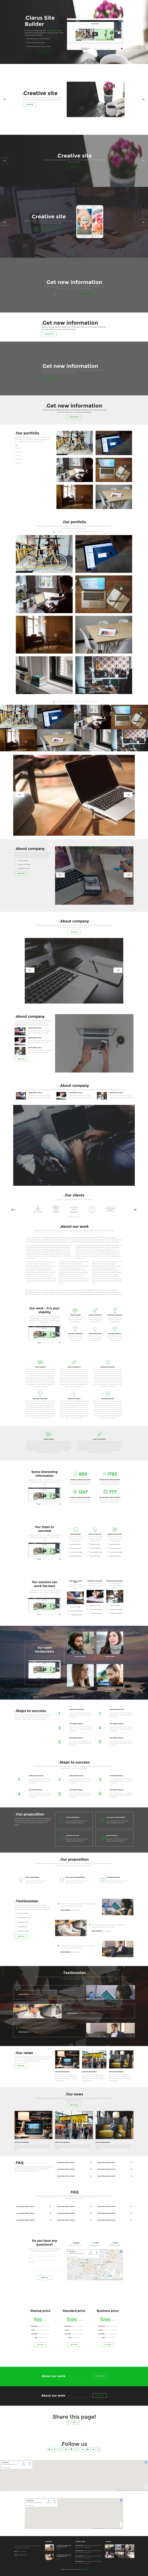 Clarus HTML/Bootstrap template